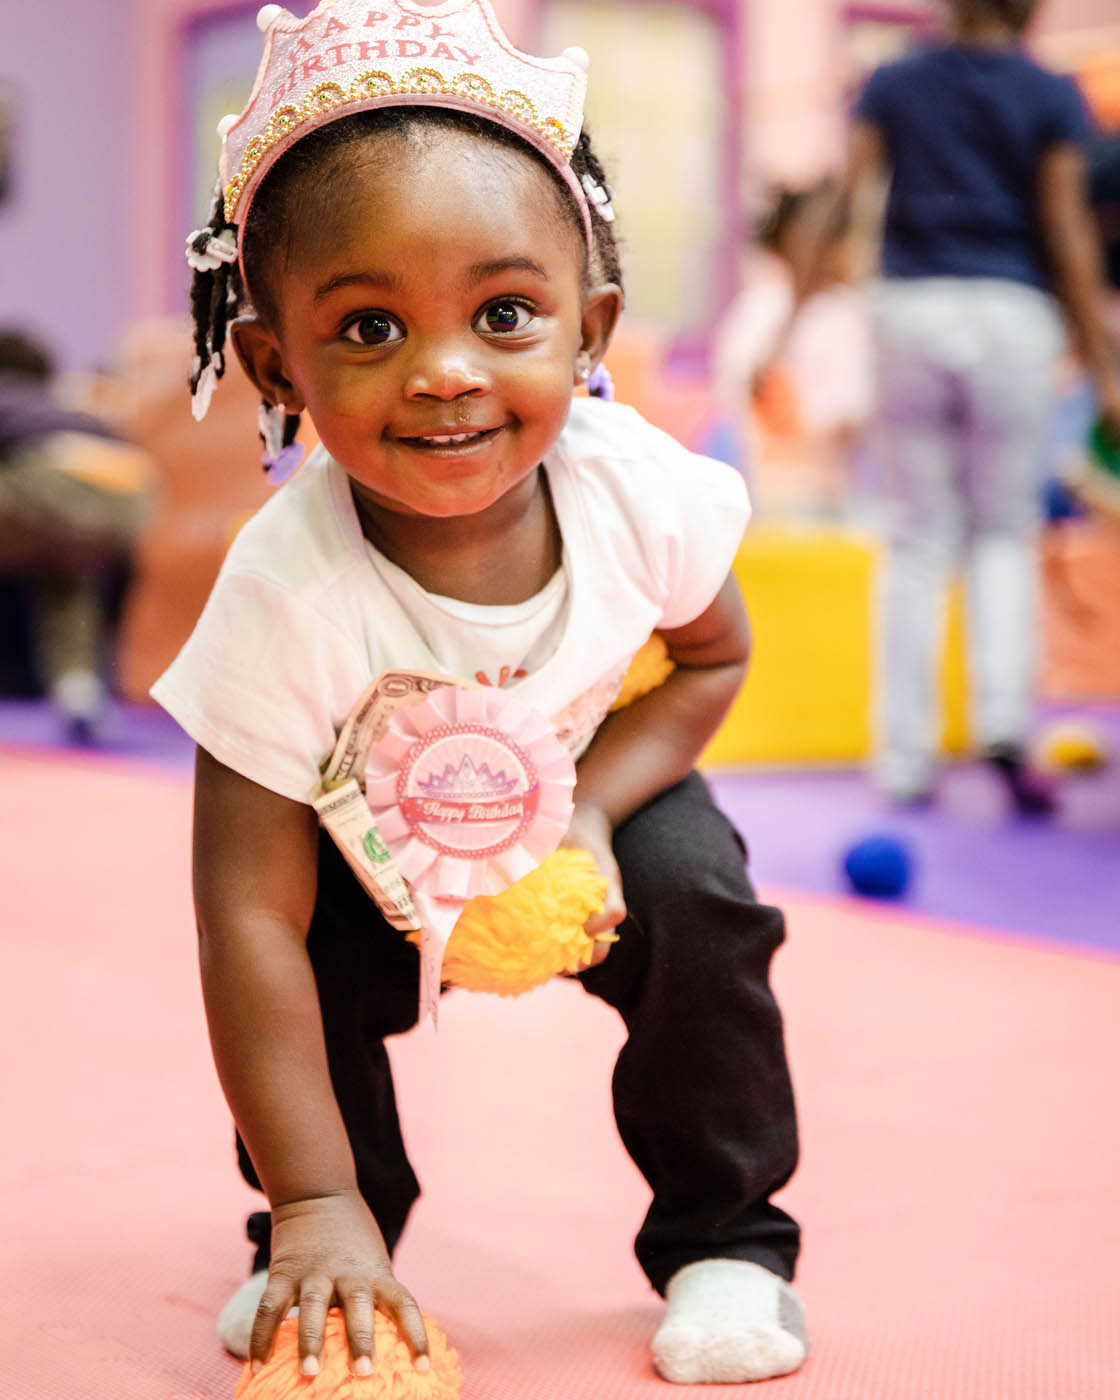 A toddler in a white shirt smiling at the camera, contact us today for toddler activities in Willow Grove.